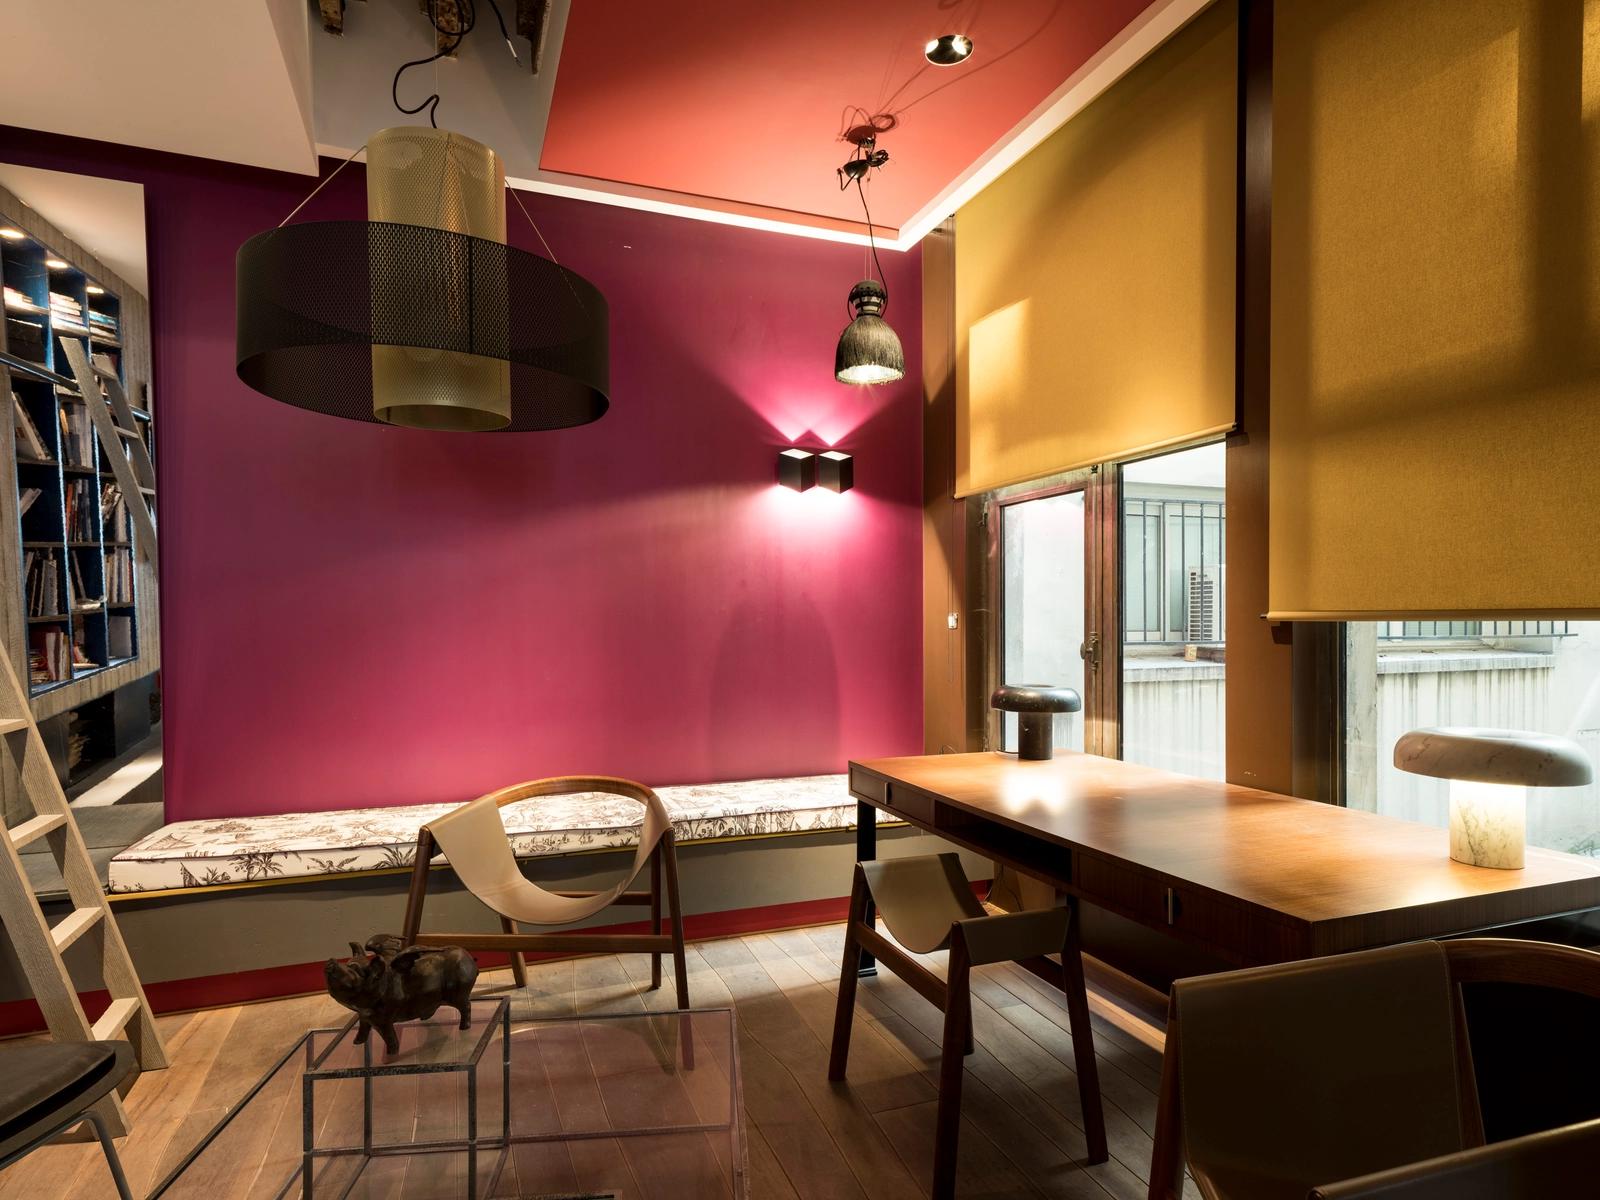 Meeting room in A colorful Parisian loft - 3